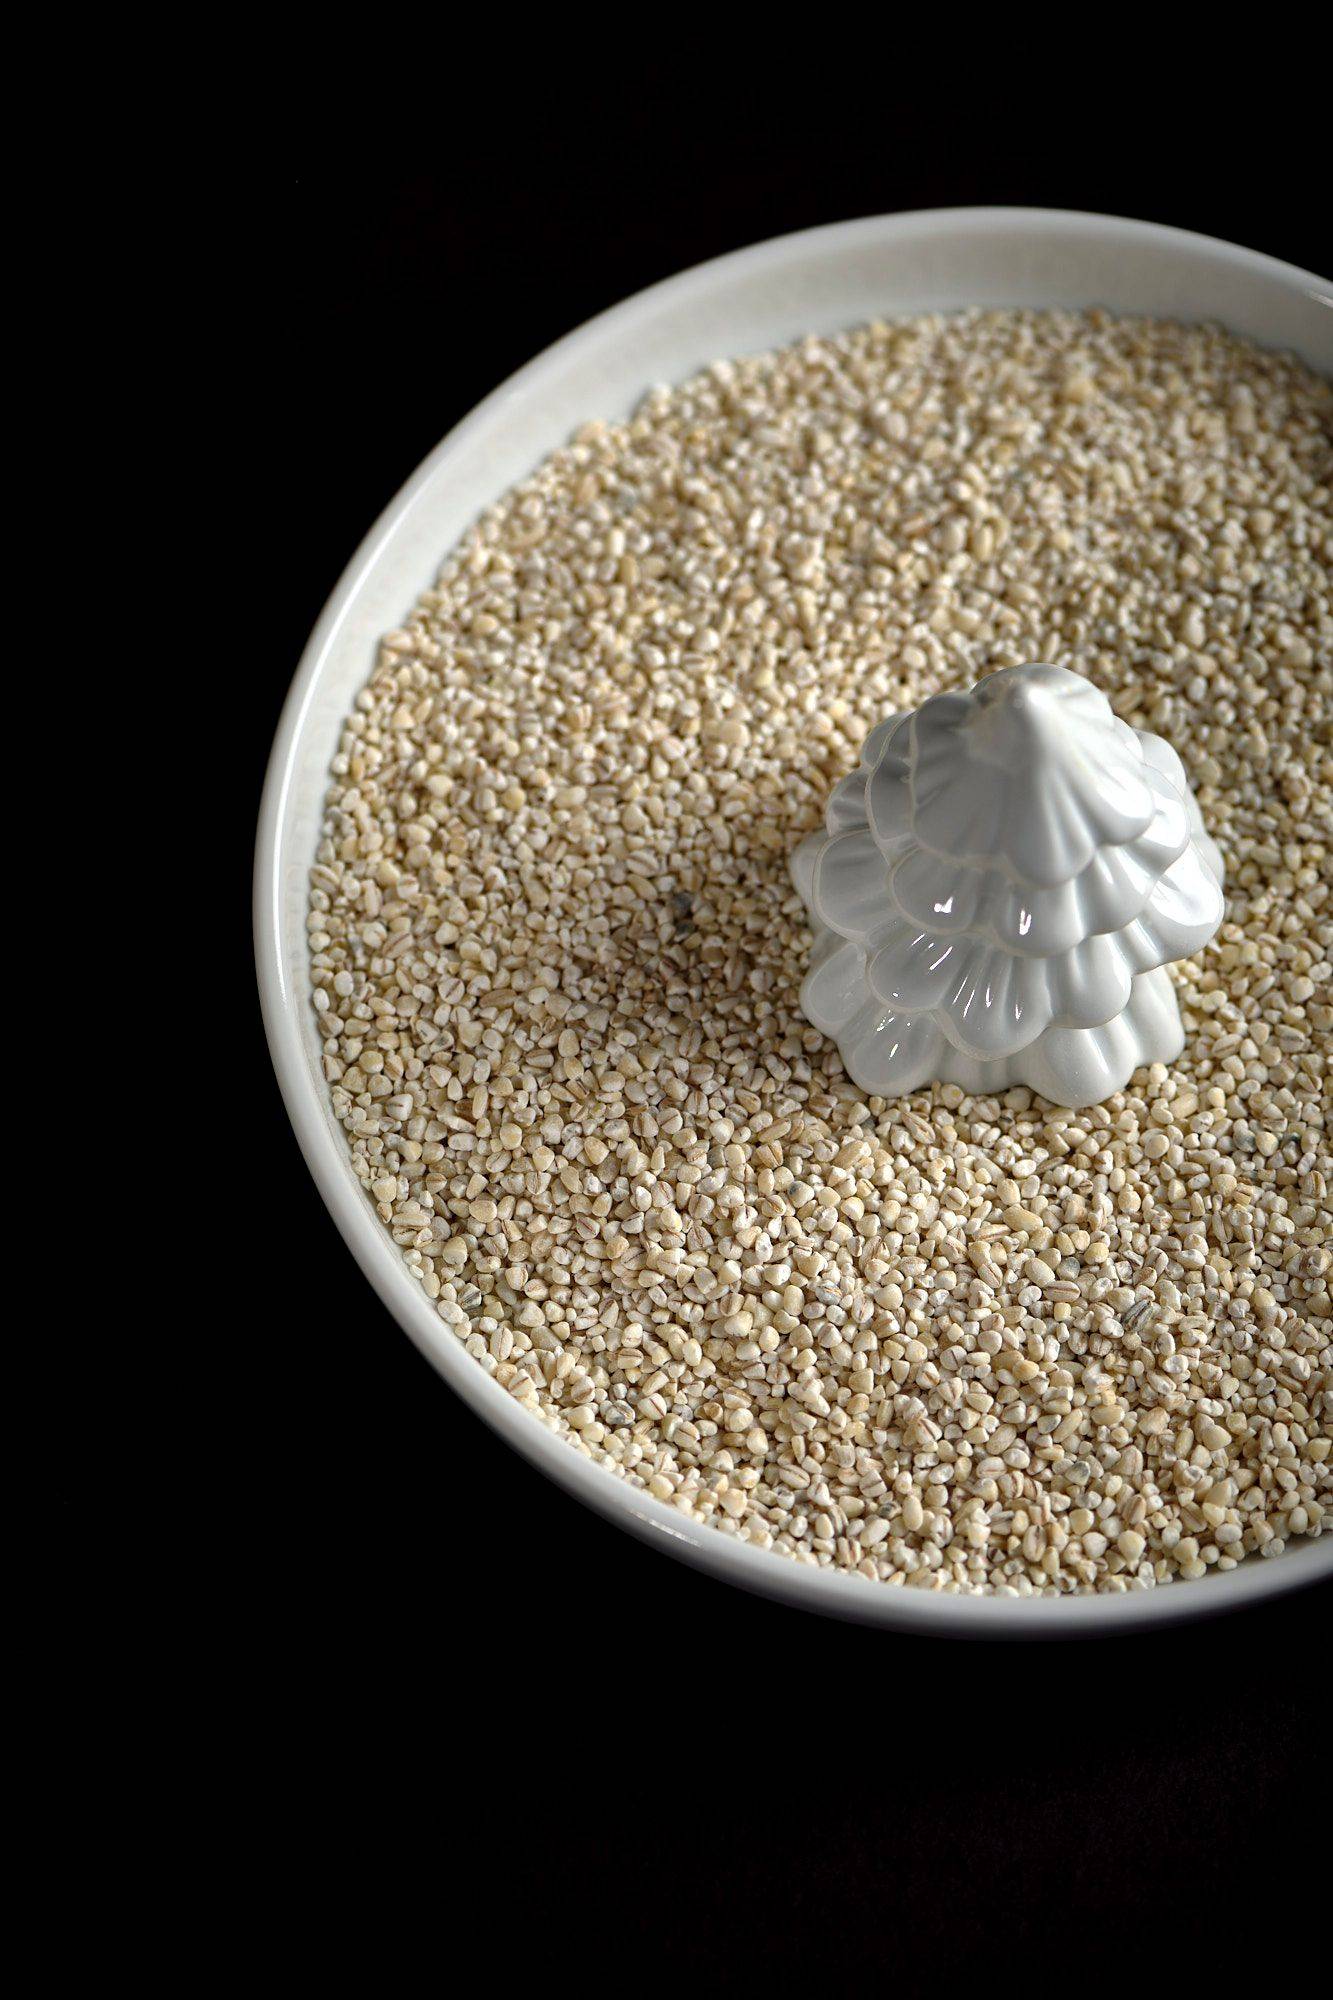 pearl barley on a white christmas plate with black background